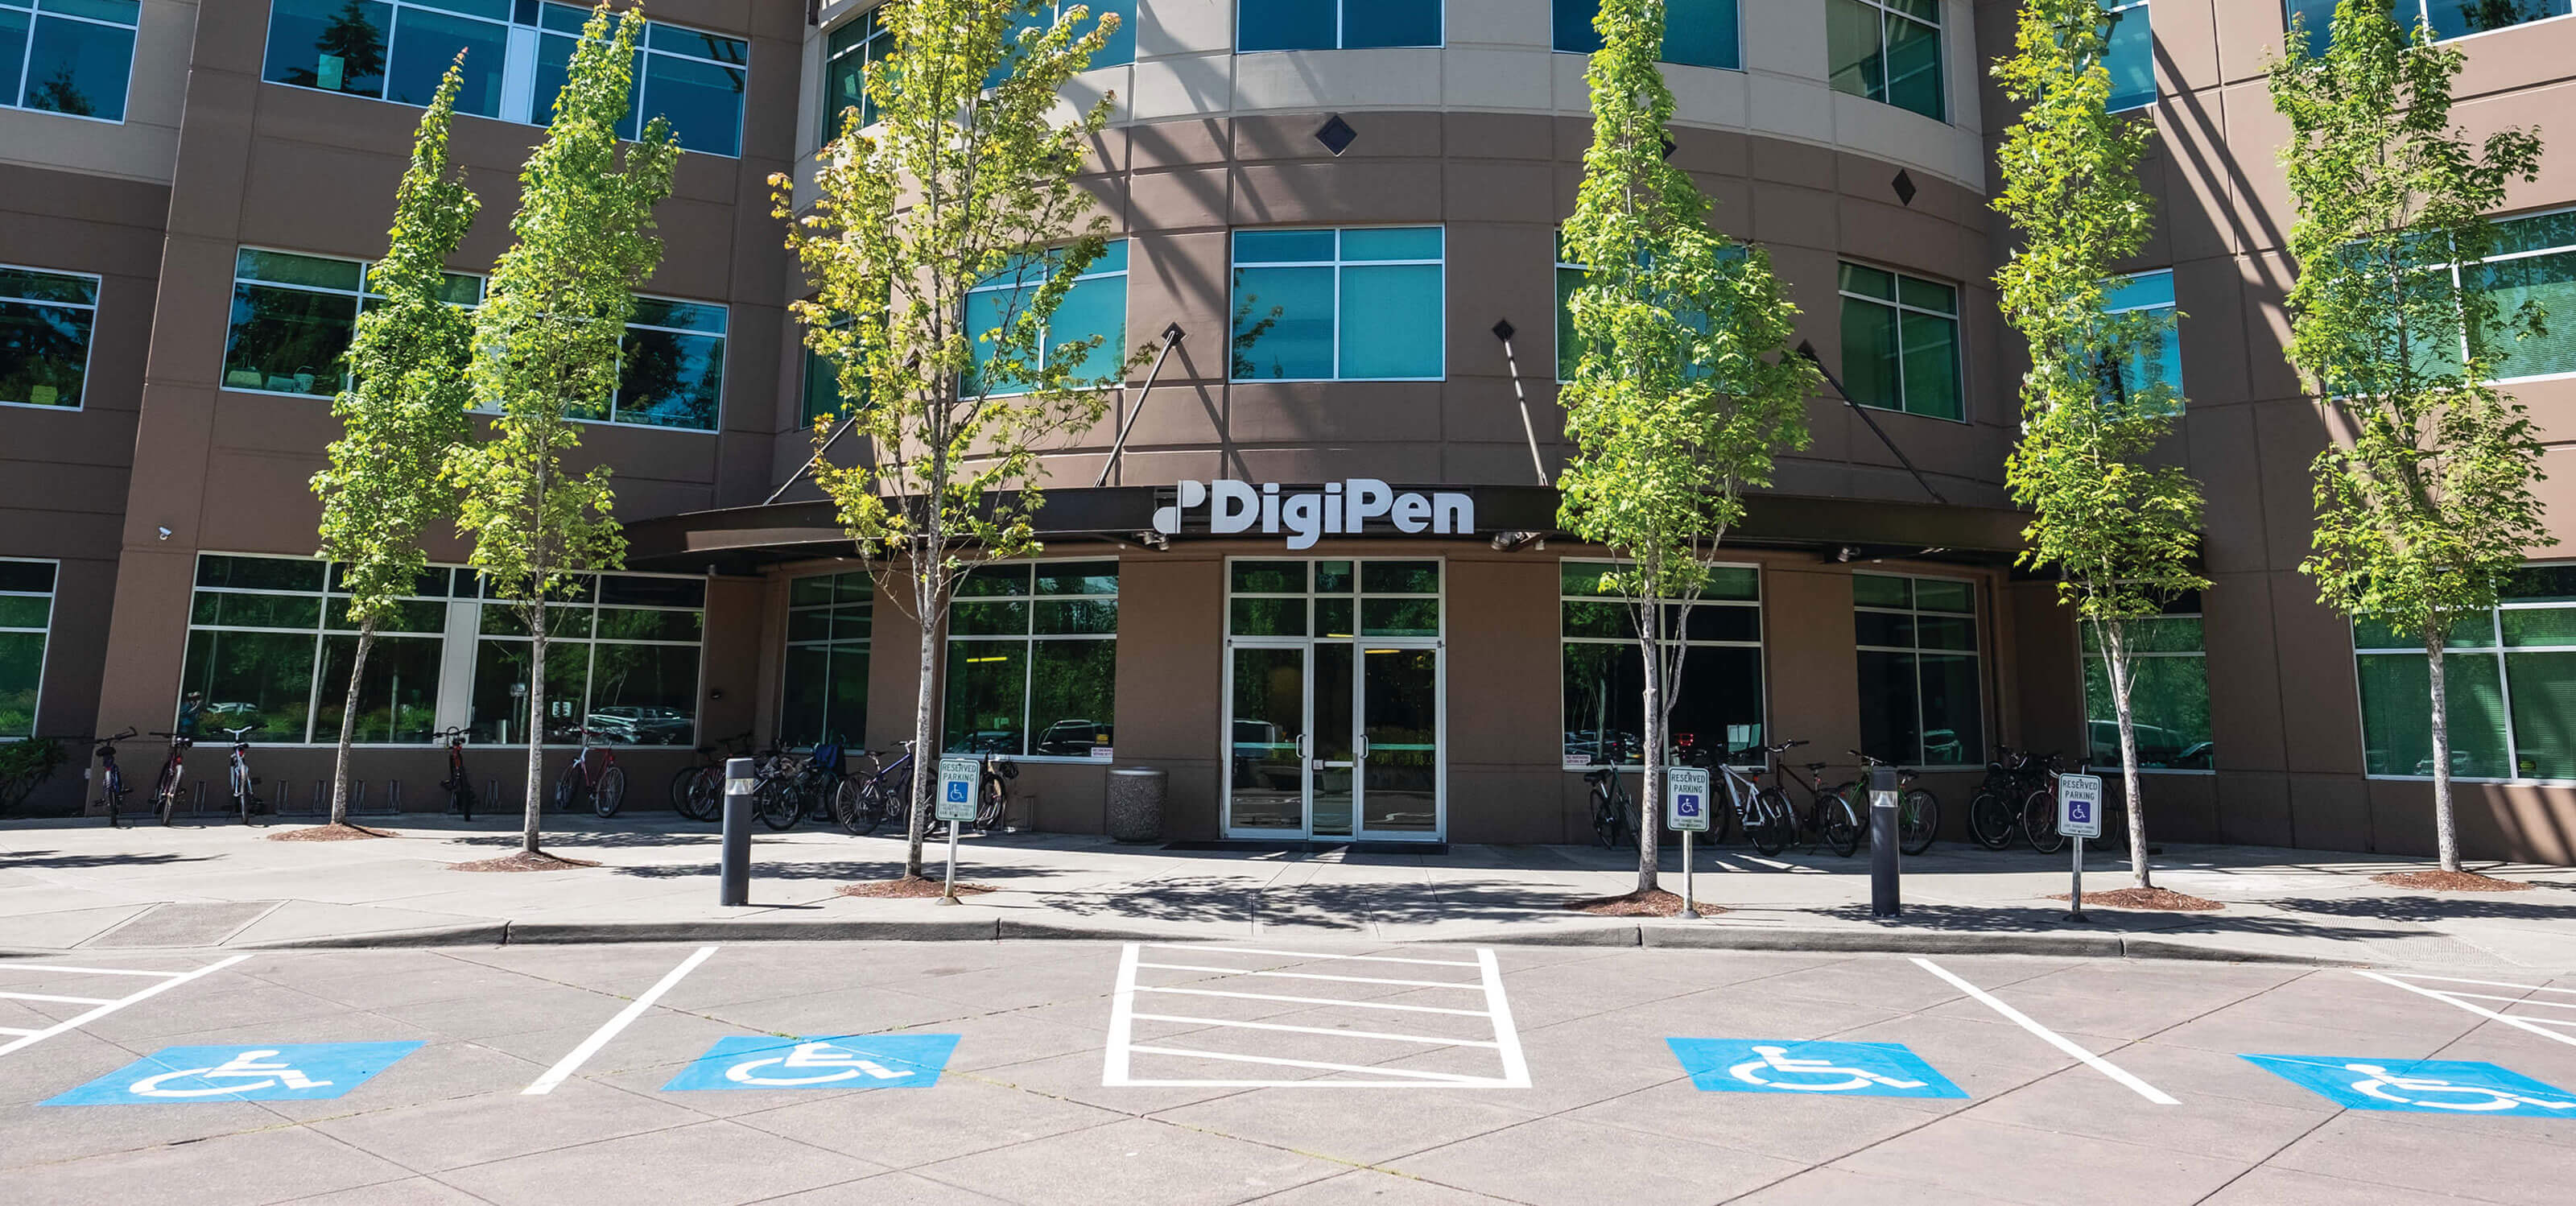 A photo of the DigiPen main entrance taken on a sunny day